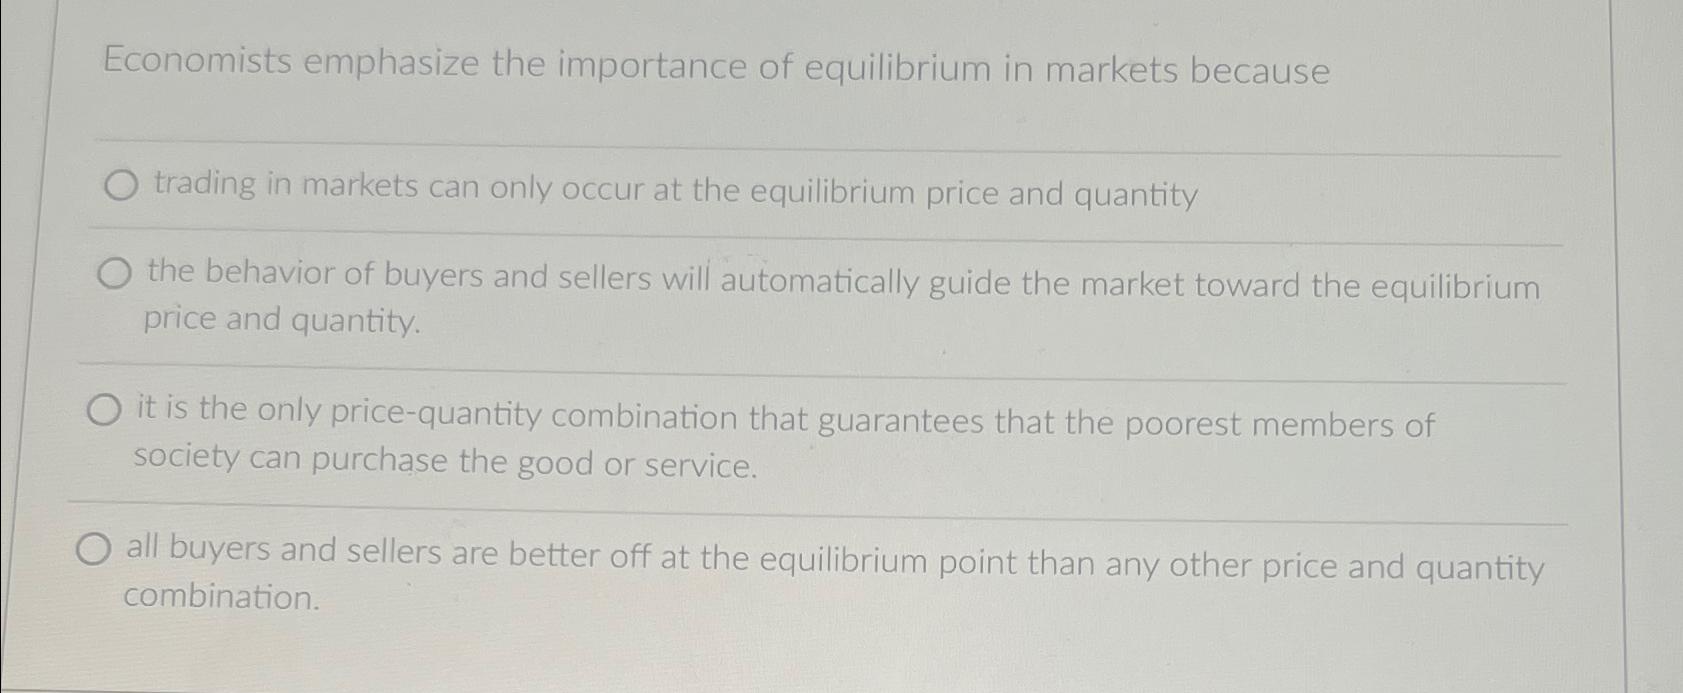 Economists emphasize the importance of equilibrium in markets because O trading in markets can only occur at